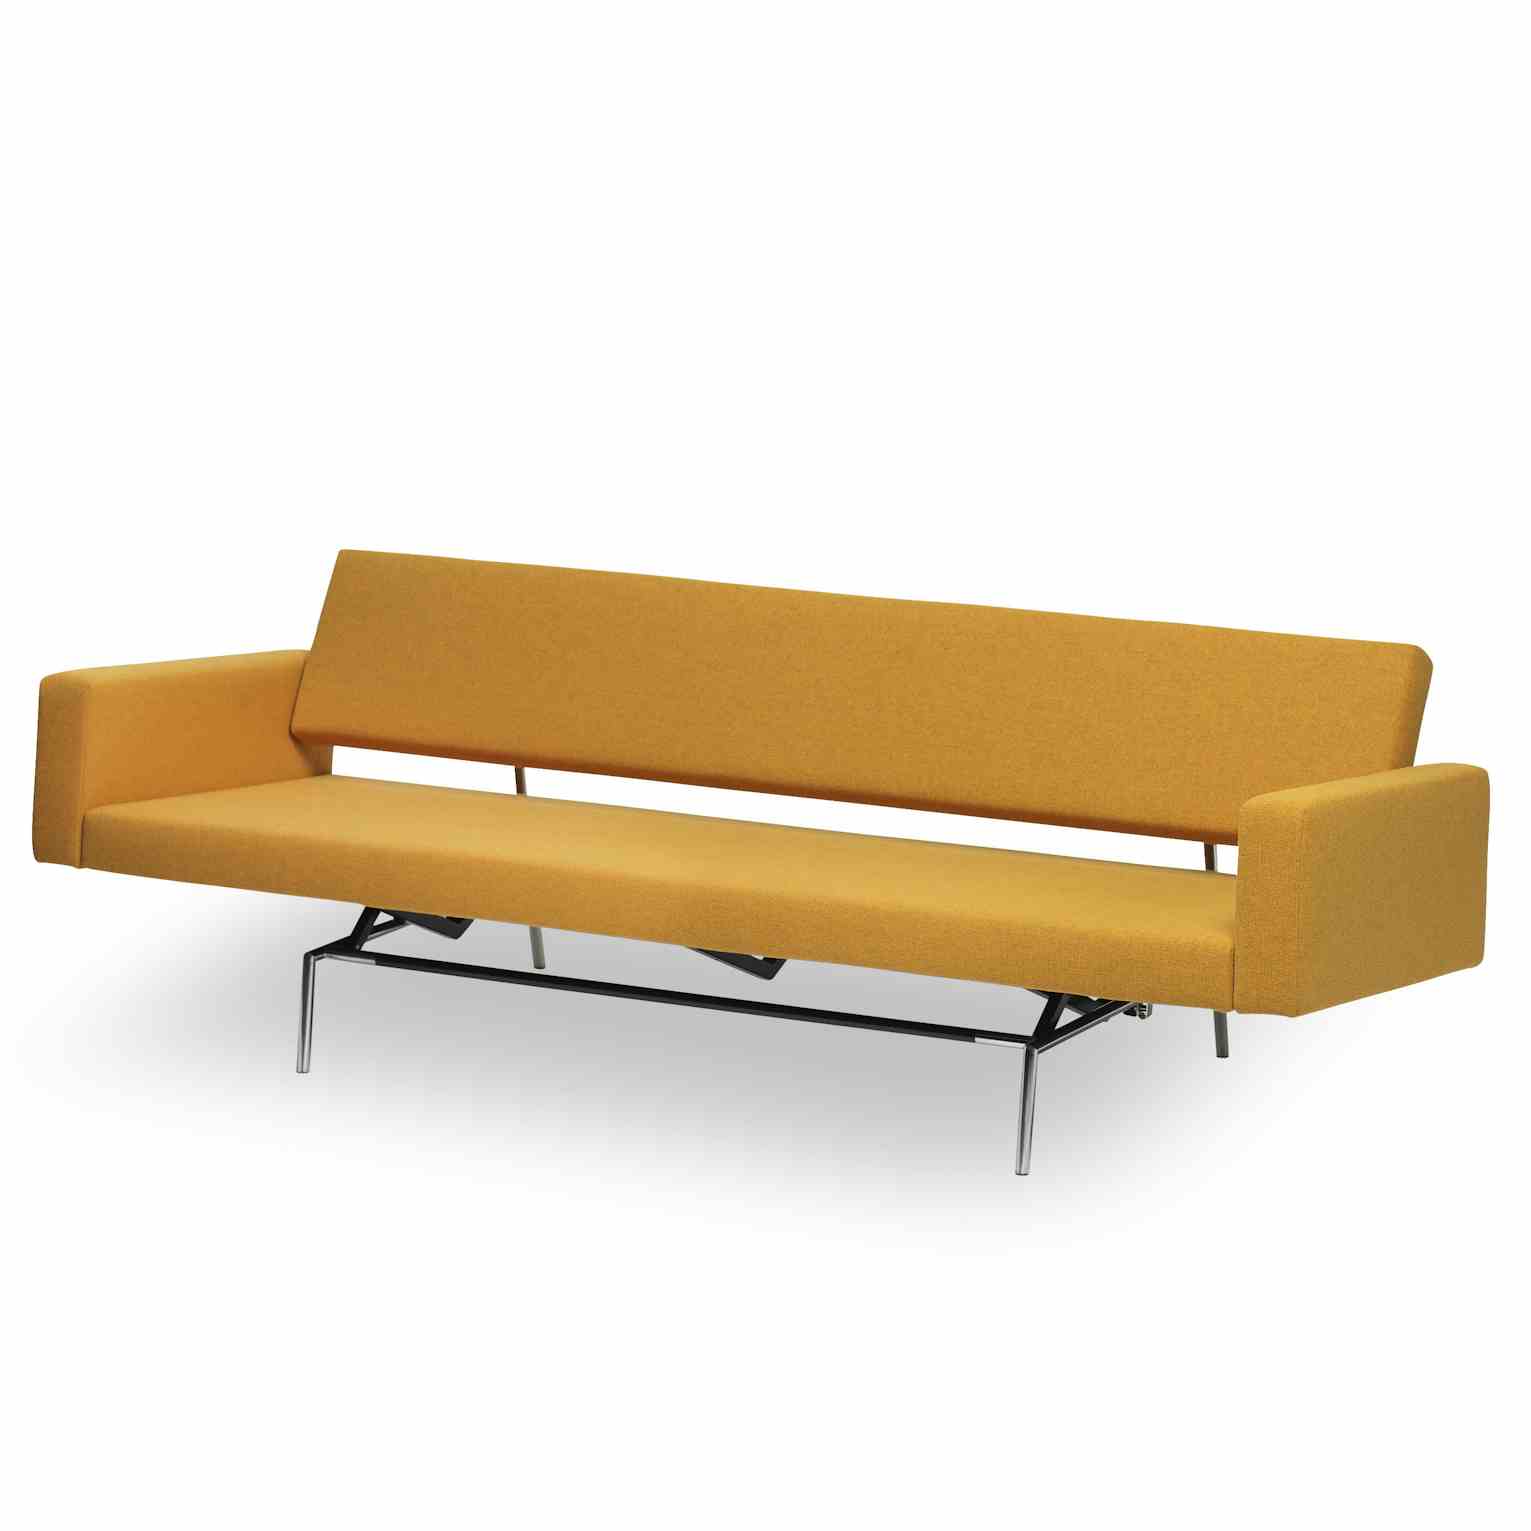 Spectrum Furniture Yellow Br 12 Sofabed Haute Living